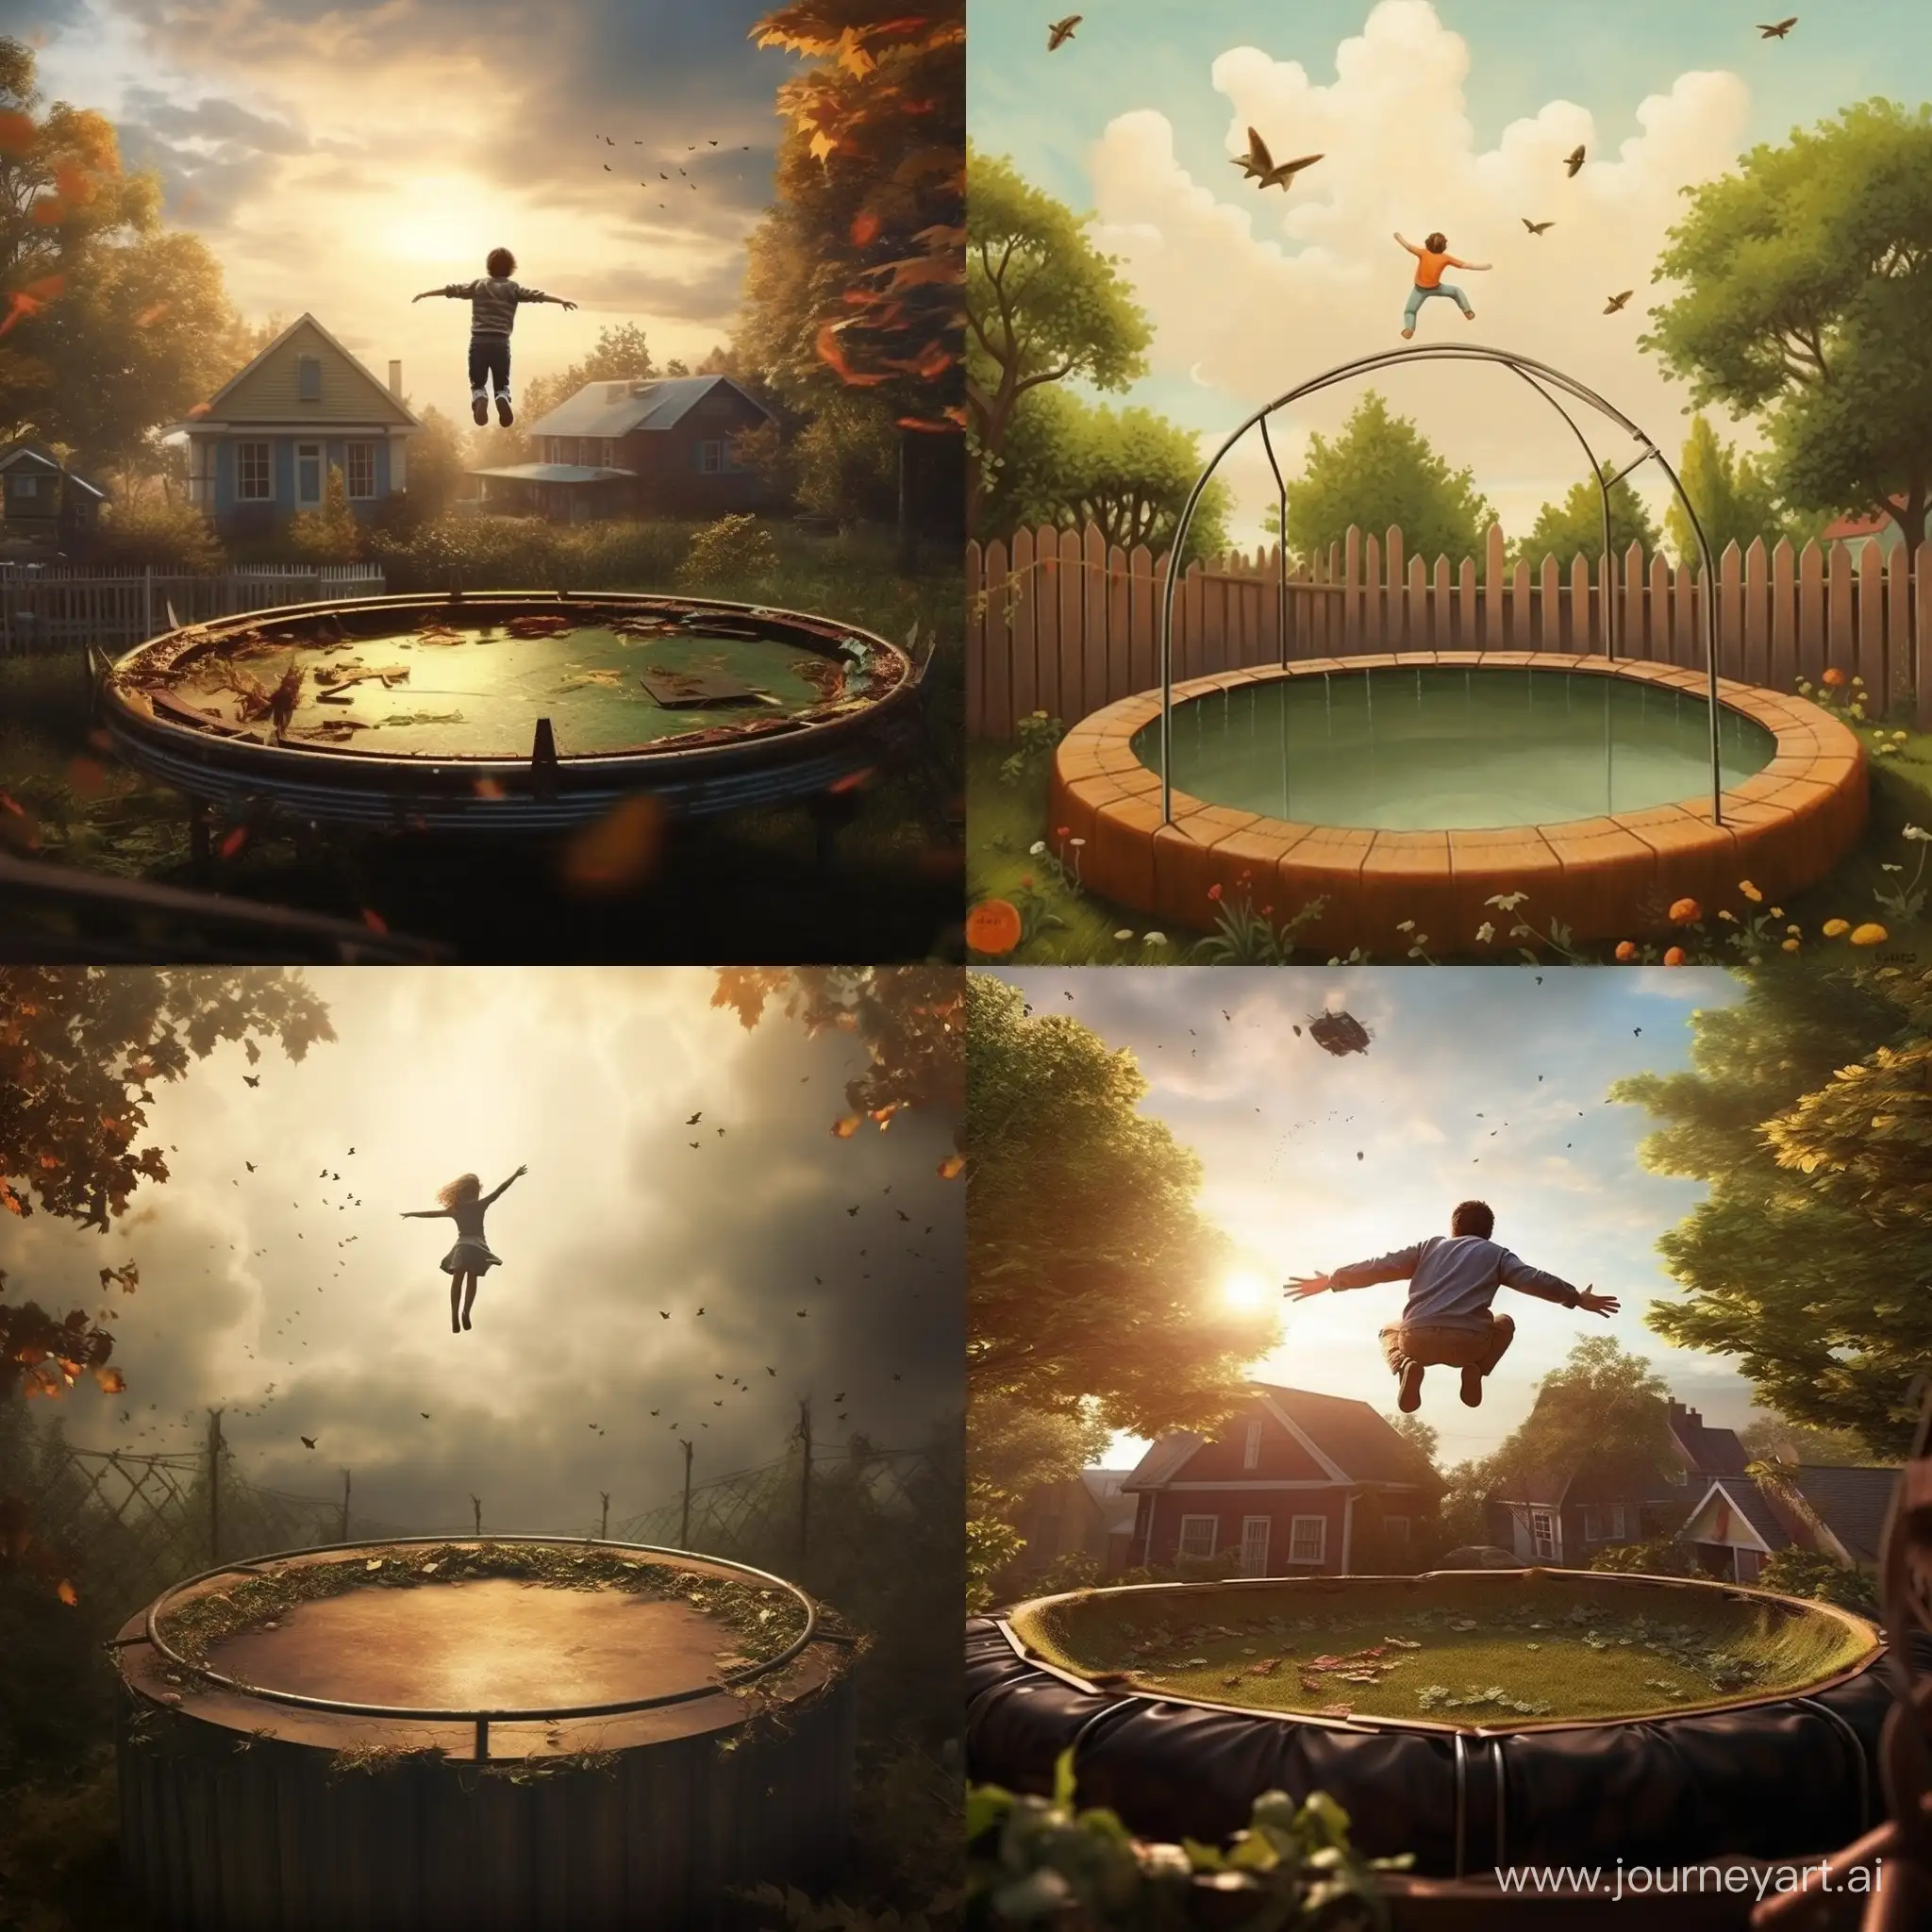 Joyful-Trampoline-Moments-Jumping-Falling-and-Unexpected-Flights